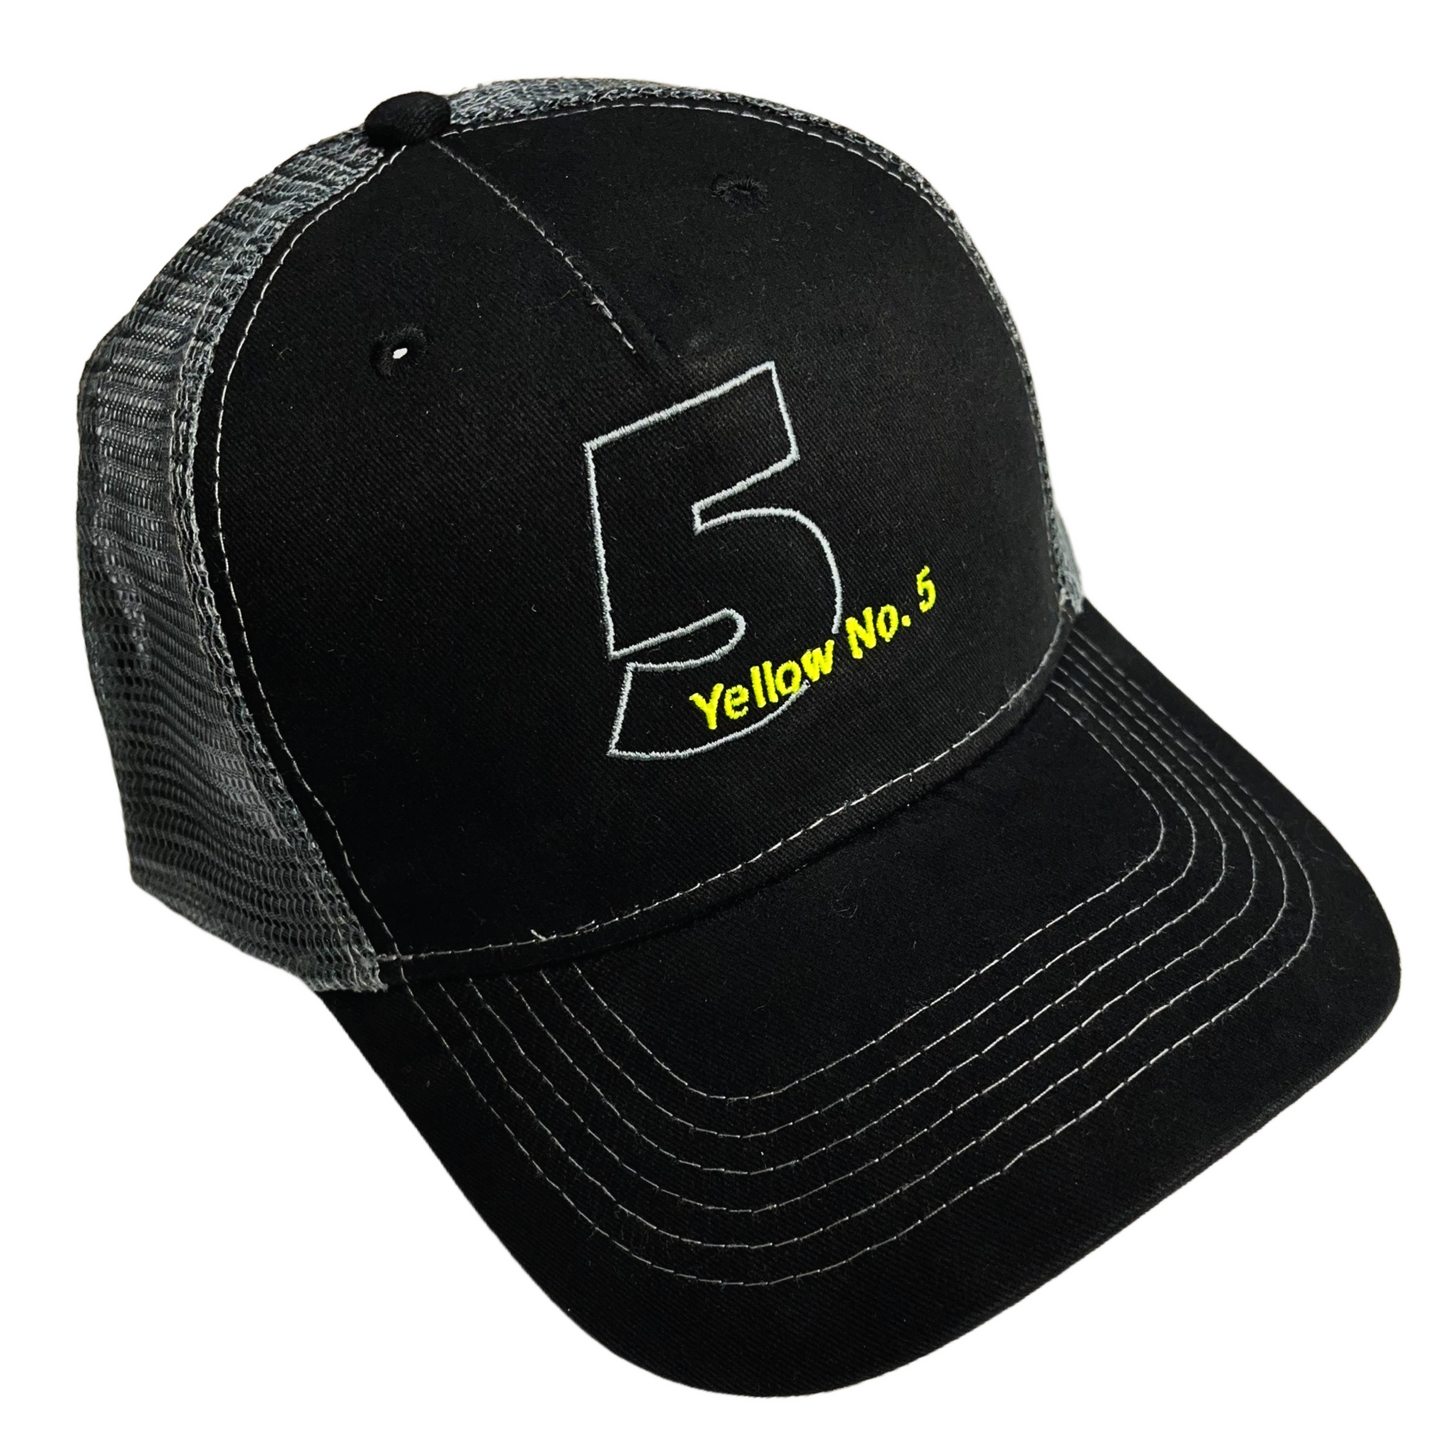 Yellow No. 5 Infield Trucker Mesh Snapback Cap Black/Slate and Black/Black One Size Fits Most